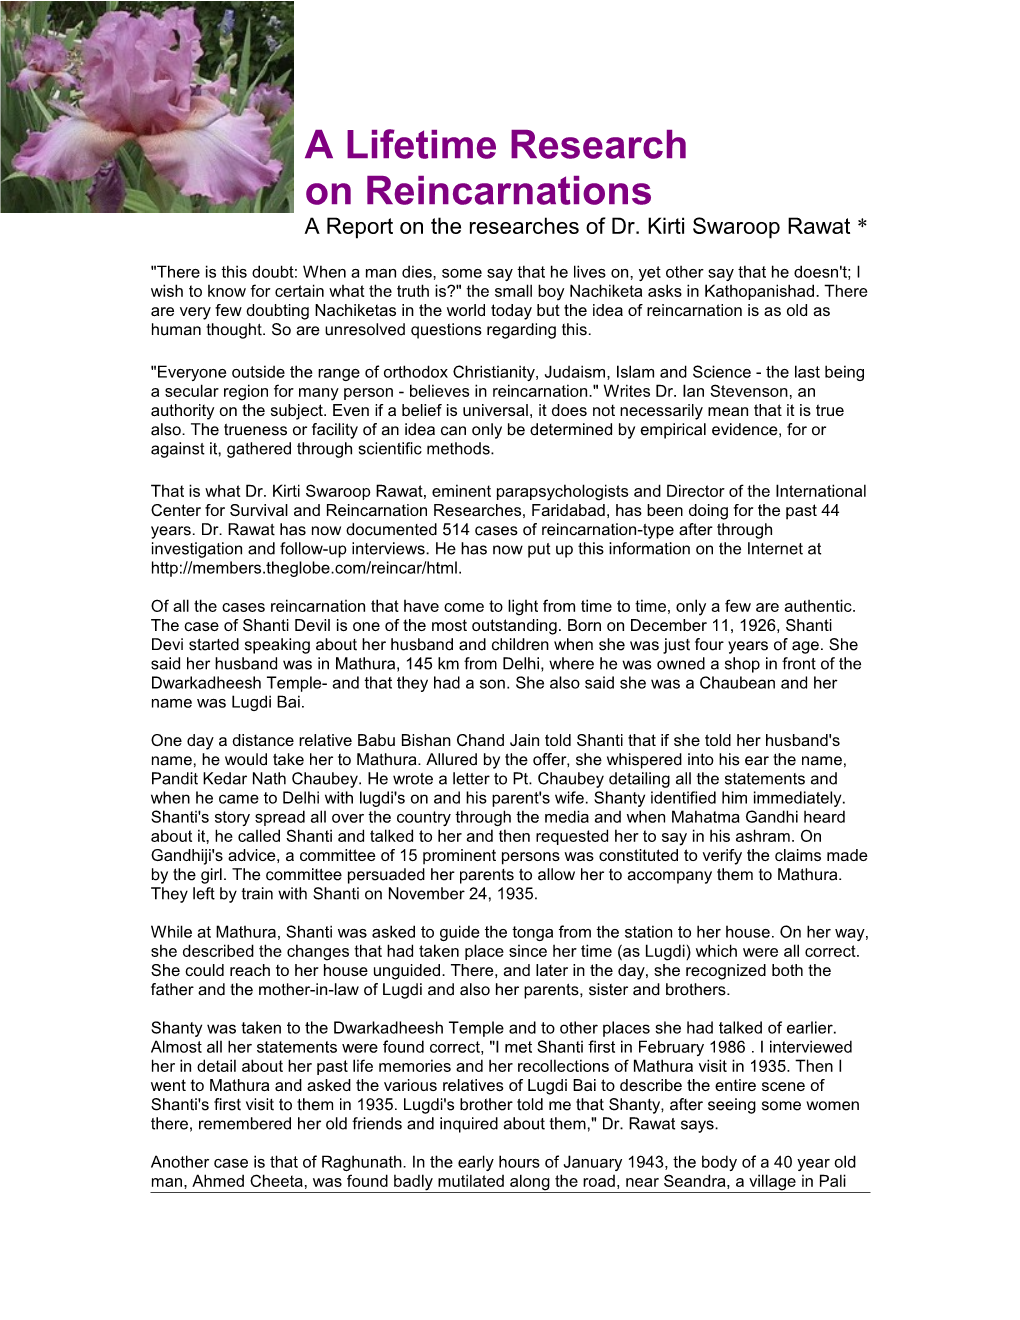 A Lifetime Research on Reincarnations a Report on the Researches of Dr. Kirti Swaroop Rawat *